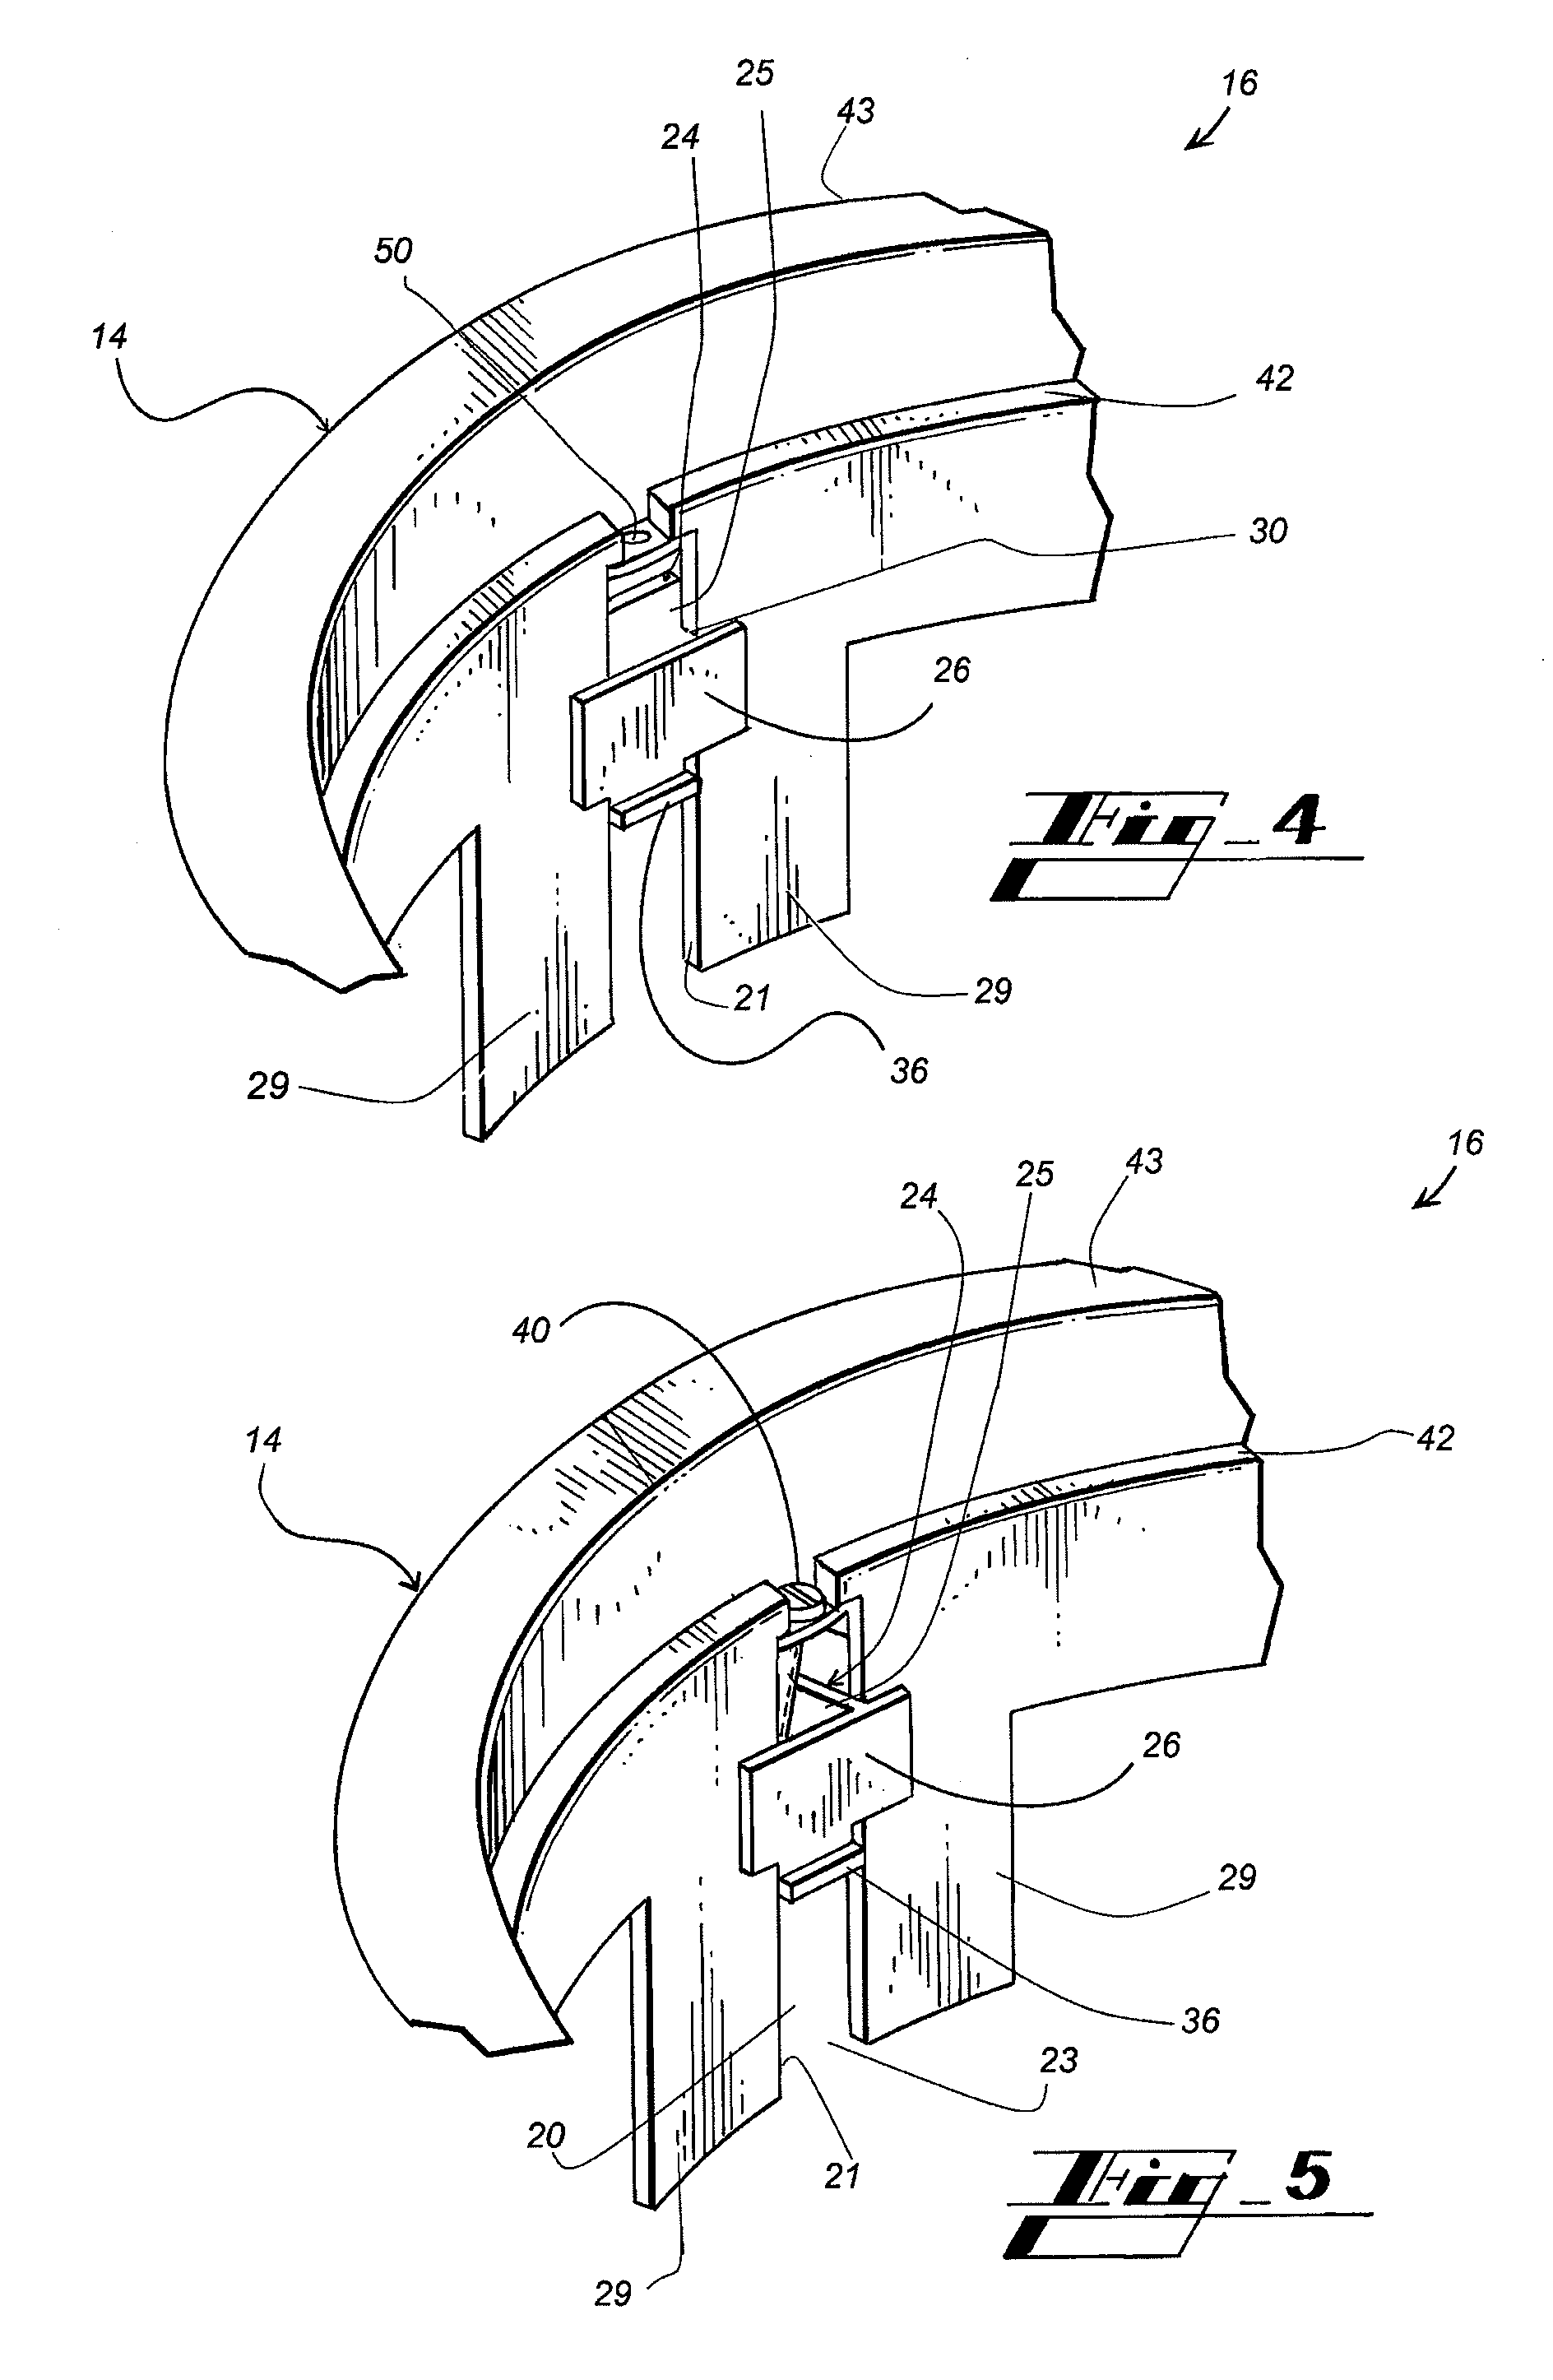 Diffuser Mounting Flange